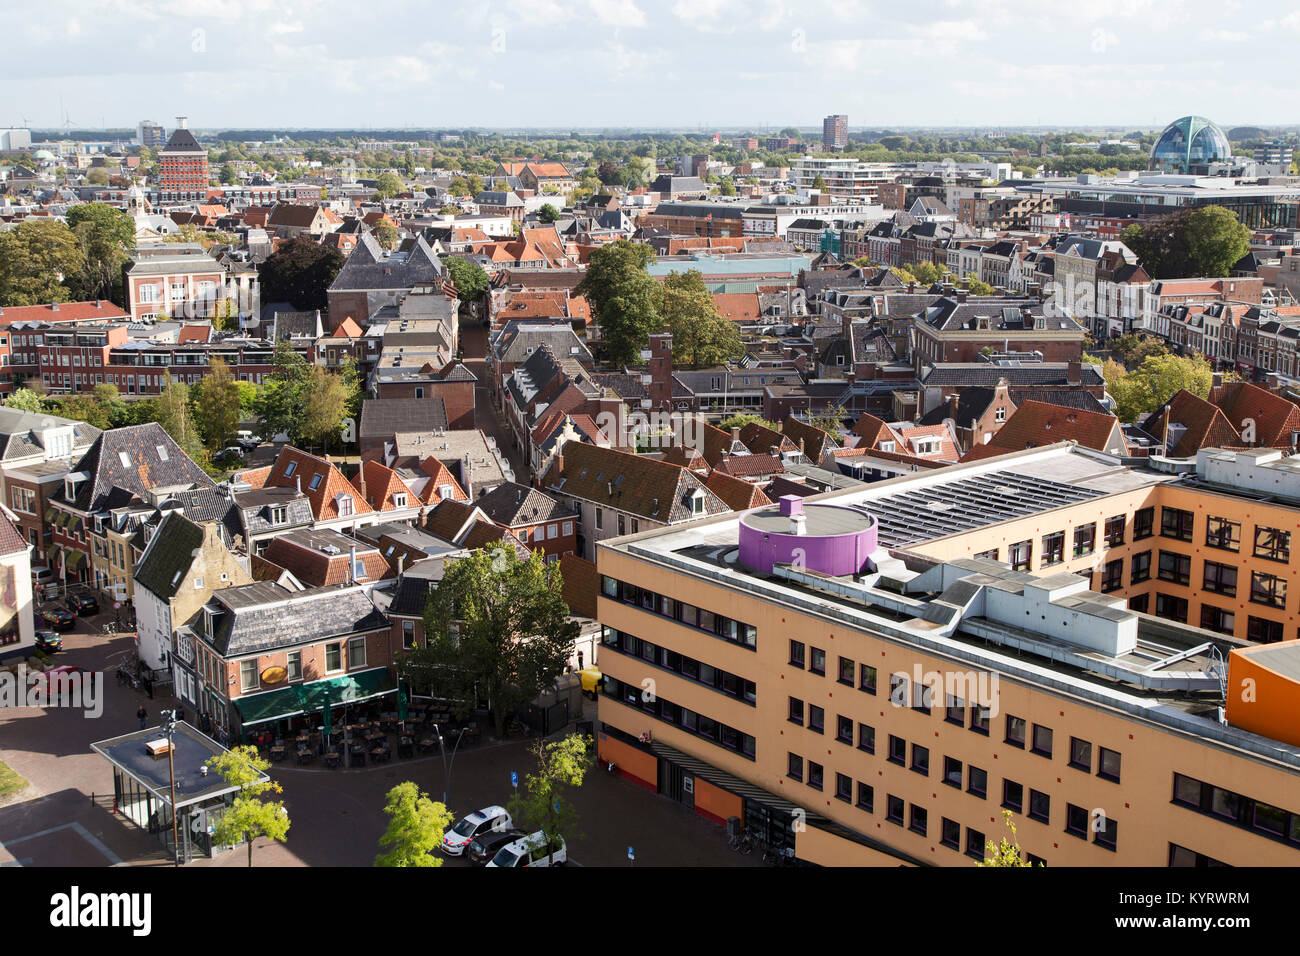 Rooftops in the city of Leeuwarden, the Netherlands. Leeuwarden is a European Capital of Culture in 2018. Stock Photo